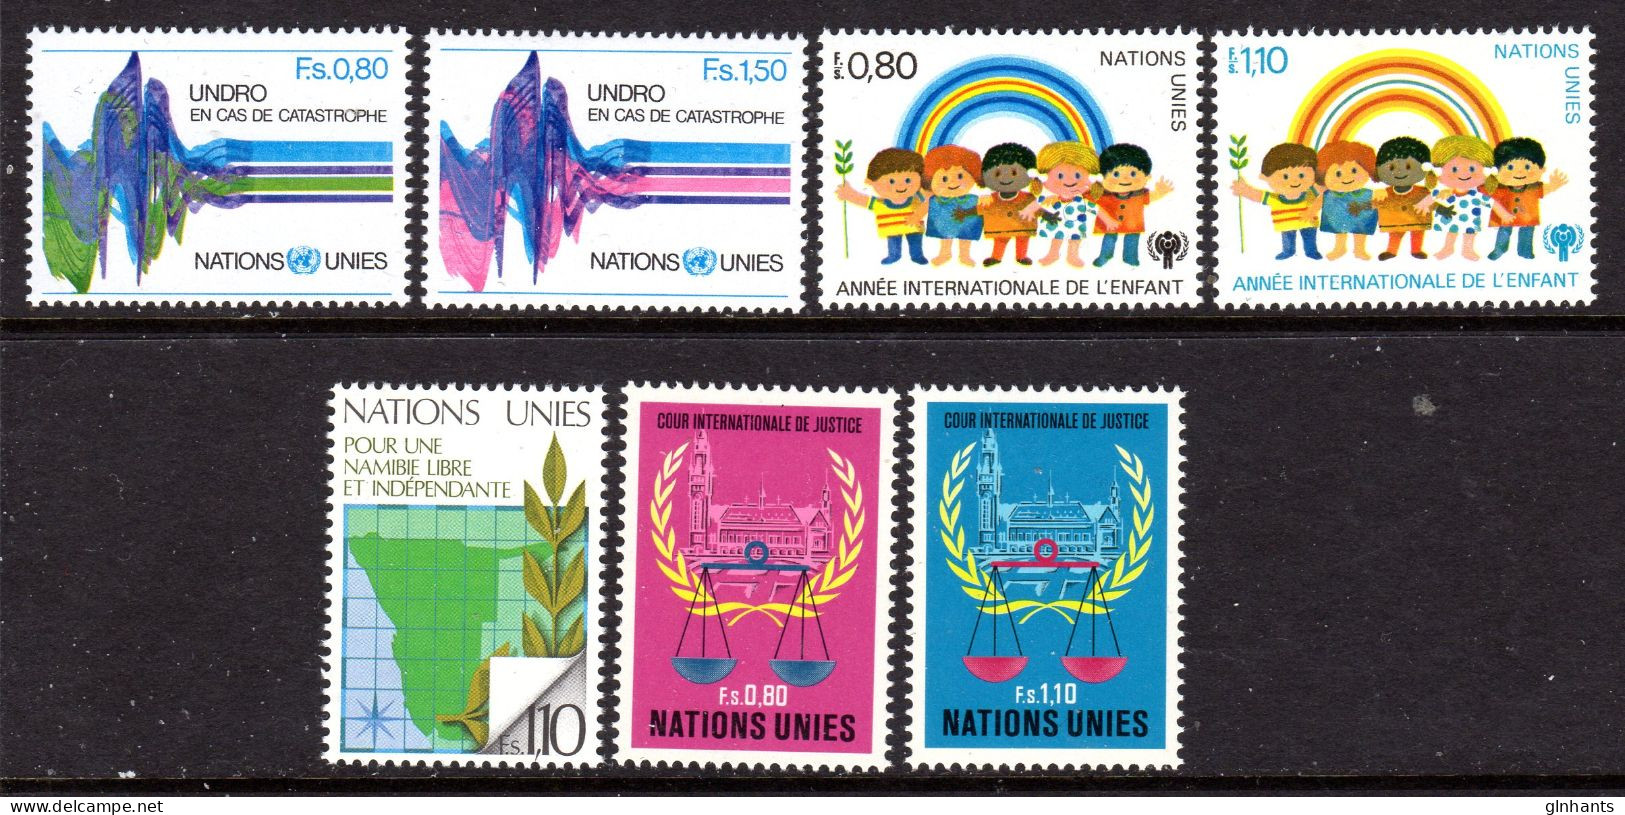 UNITED NATIONS UN GENEVA - 1979 COMPLETE YEAR SET (7V) AS PICTURED FINE MNH ** SG G82-G88 - Unused Stamps